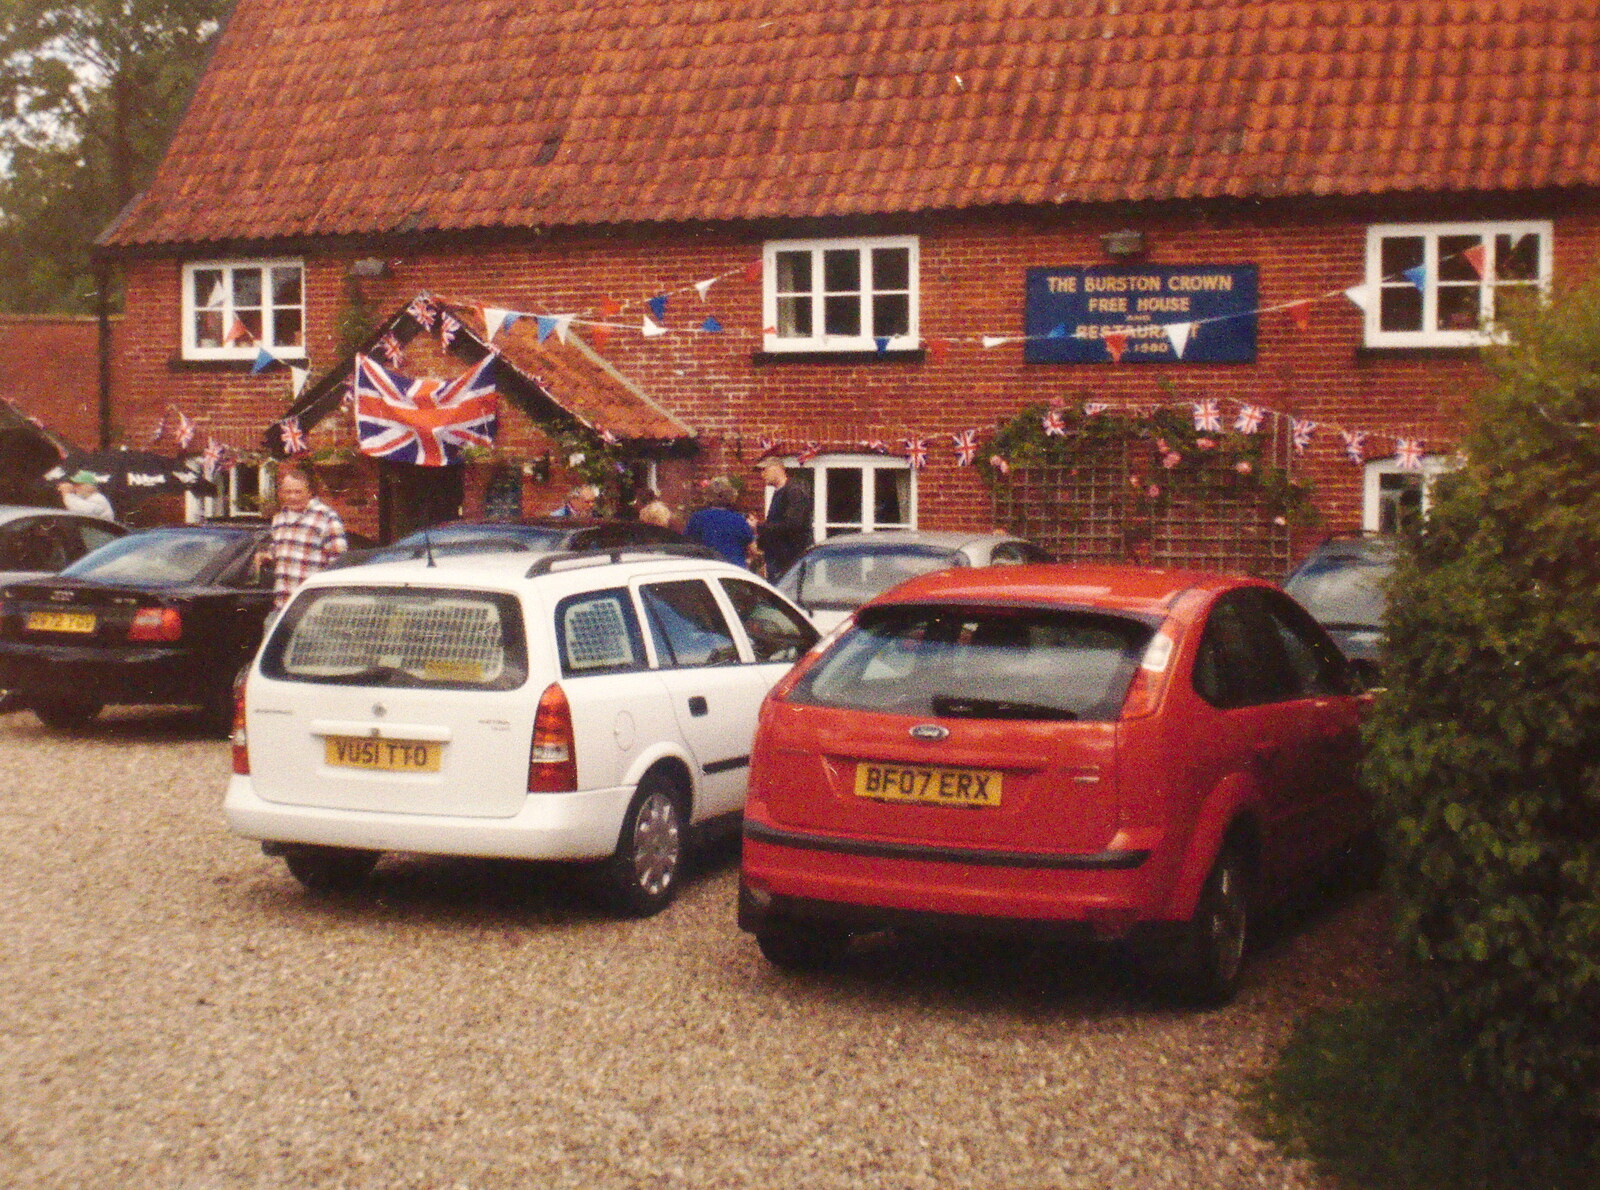 There's a photo on the bog wall with Jo's old car from The BSCC at the Burston Crown, and the Oaksmere Re-opens, Brome, Suffolk - 1st May 2014